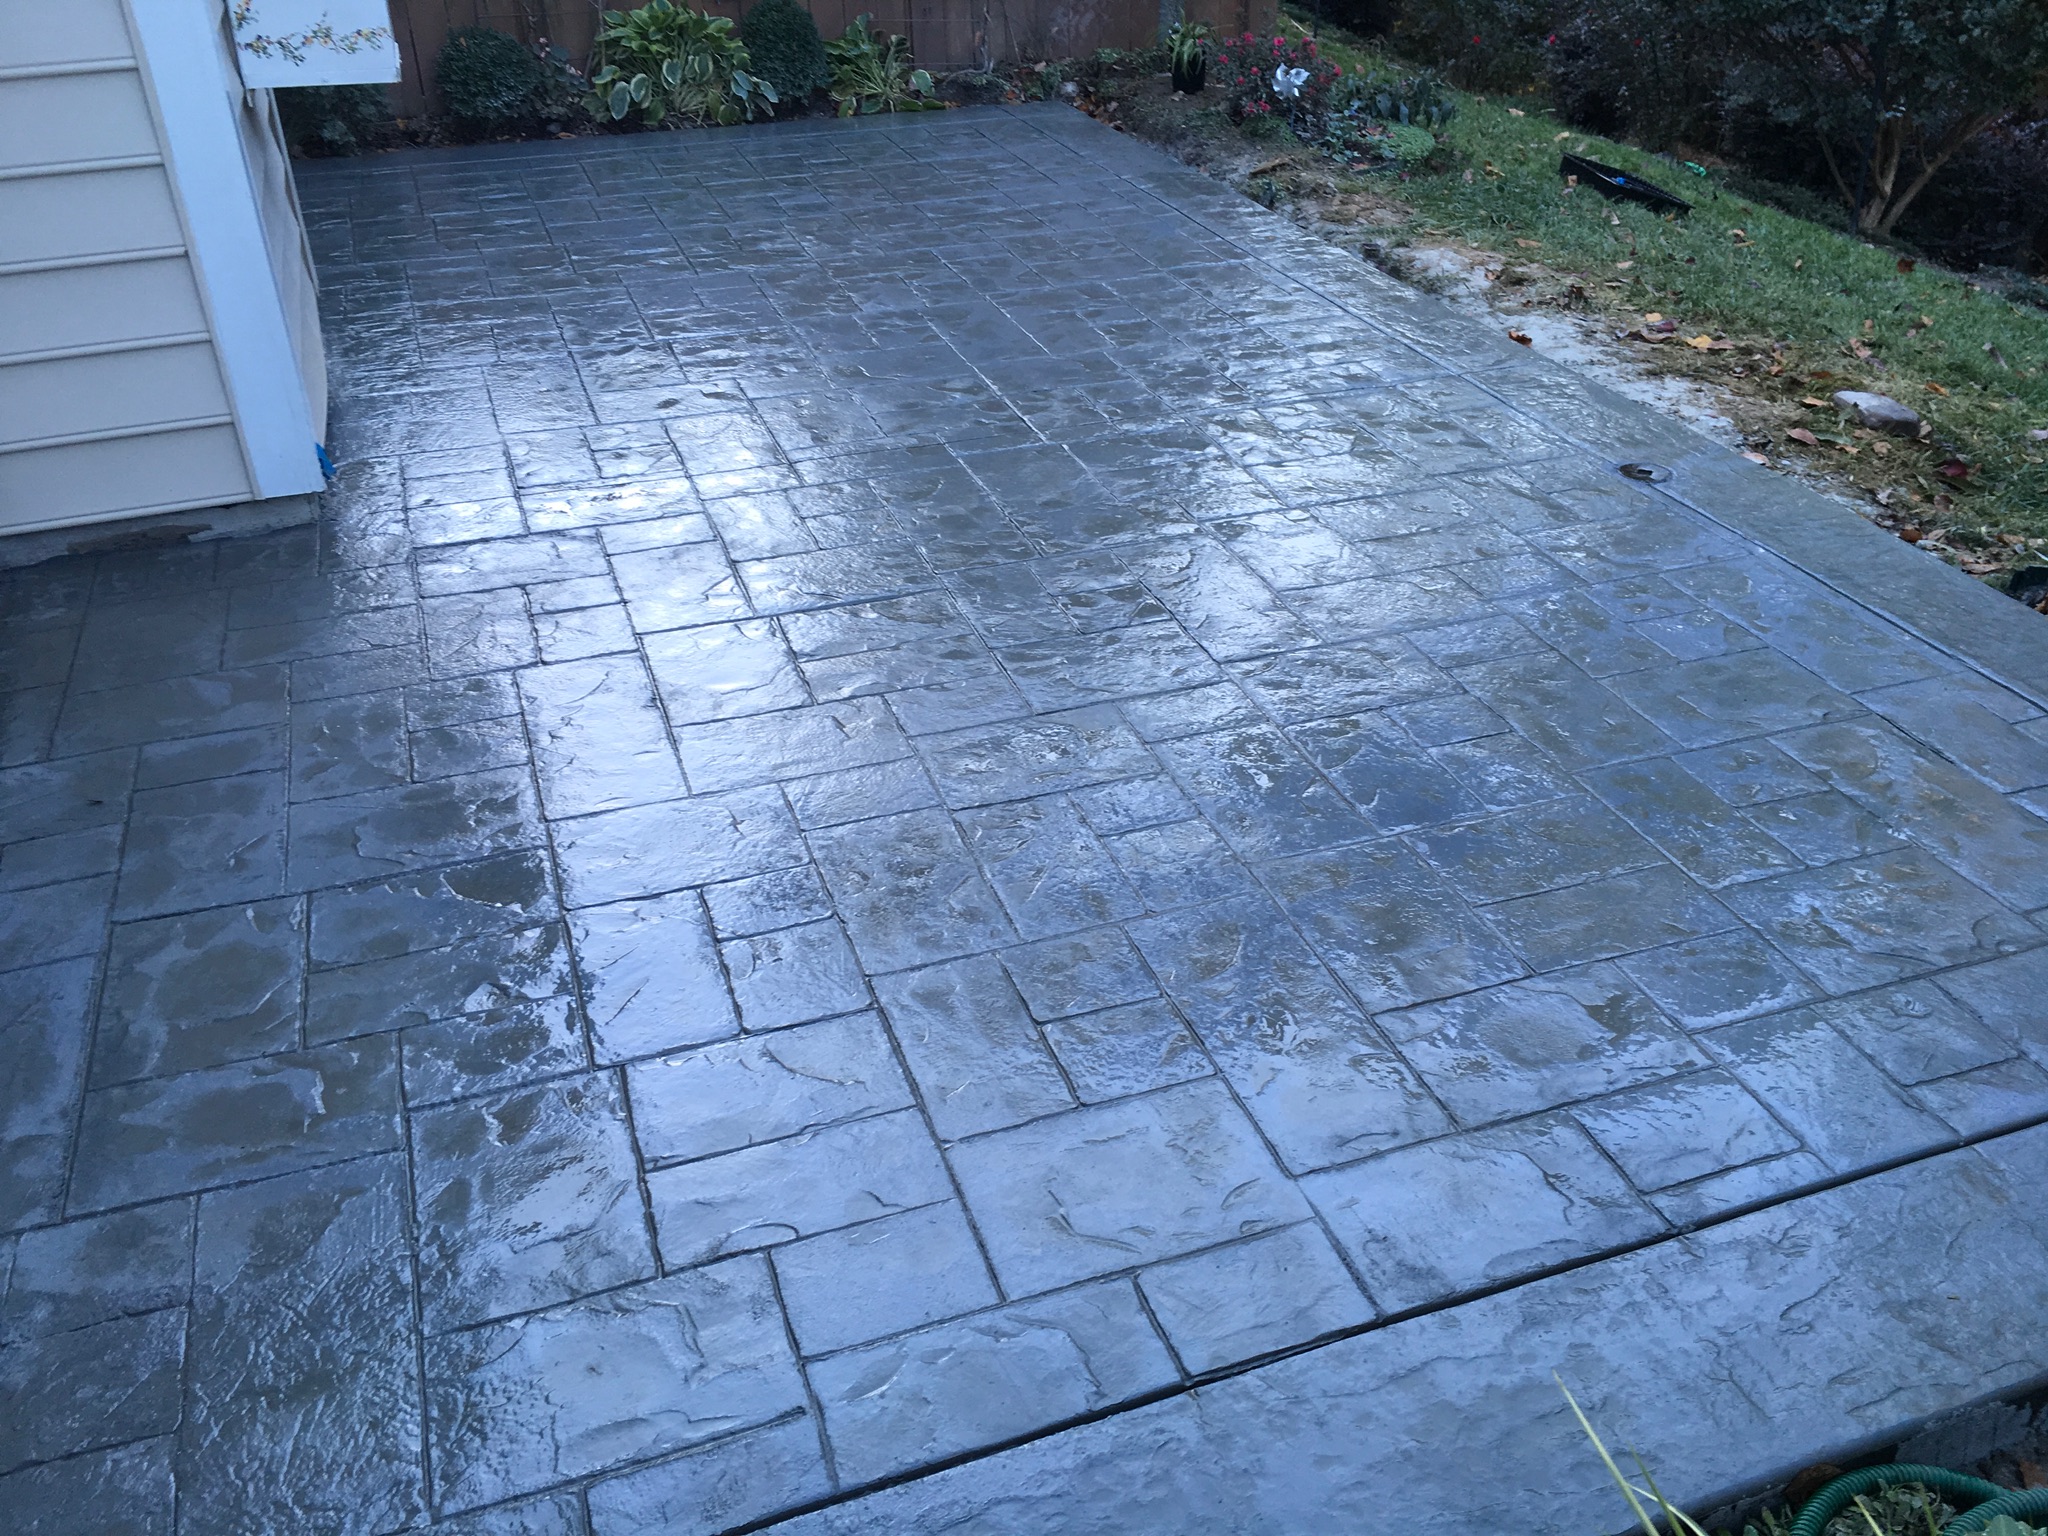 Stamped Patio With 12 in. Border (2017_09_24 06_10_19 UTC).jpg